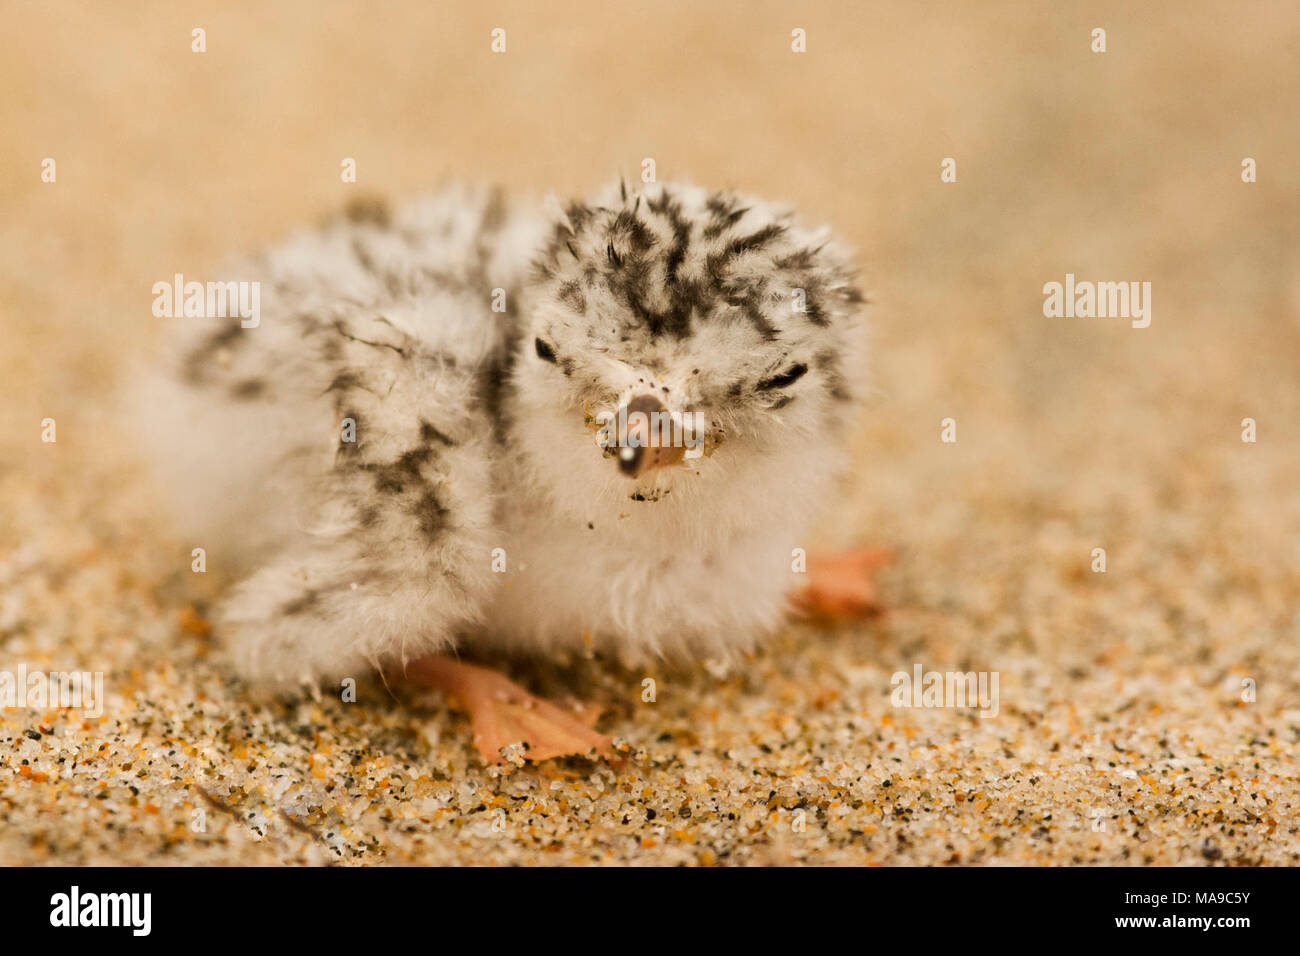 Federally endangered California least tern chick. In 2014, Air Force staff and partners successfully restored 50 acres of coastal beach and dune habitat to benefit at-risk coastal species including the Western snowy plover and California least tern, resulting in a significant increase in nesting success compared to previous years. This coastal restoration effort will expand to around 300 acres through 2019.         In 2014, California least terns were observed in the restored area, teaching their fledglings to fish in the adjacent Santa Ynez River estuary. Stock Photo